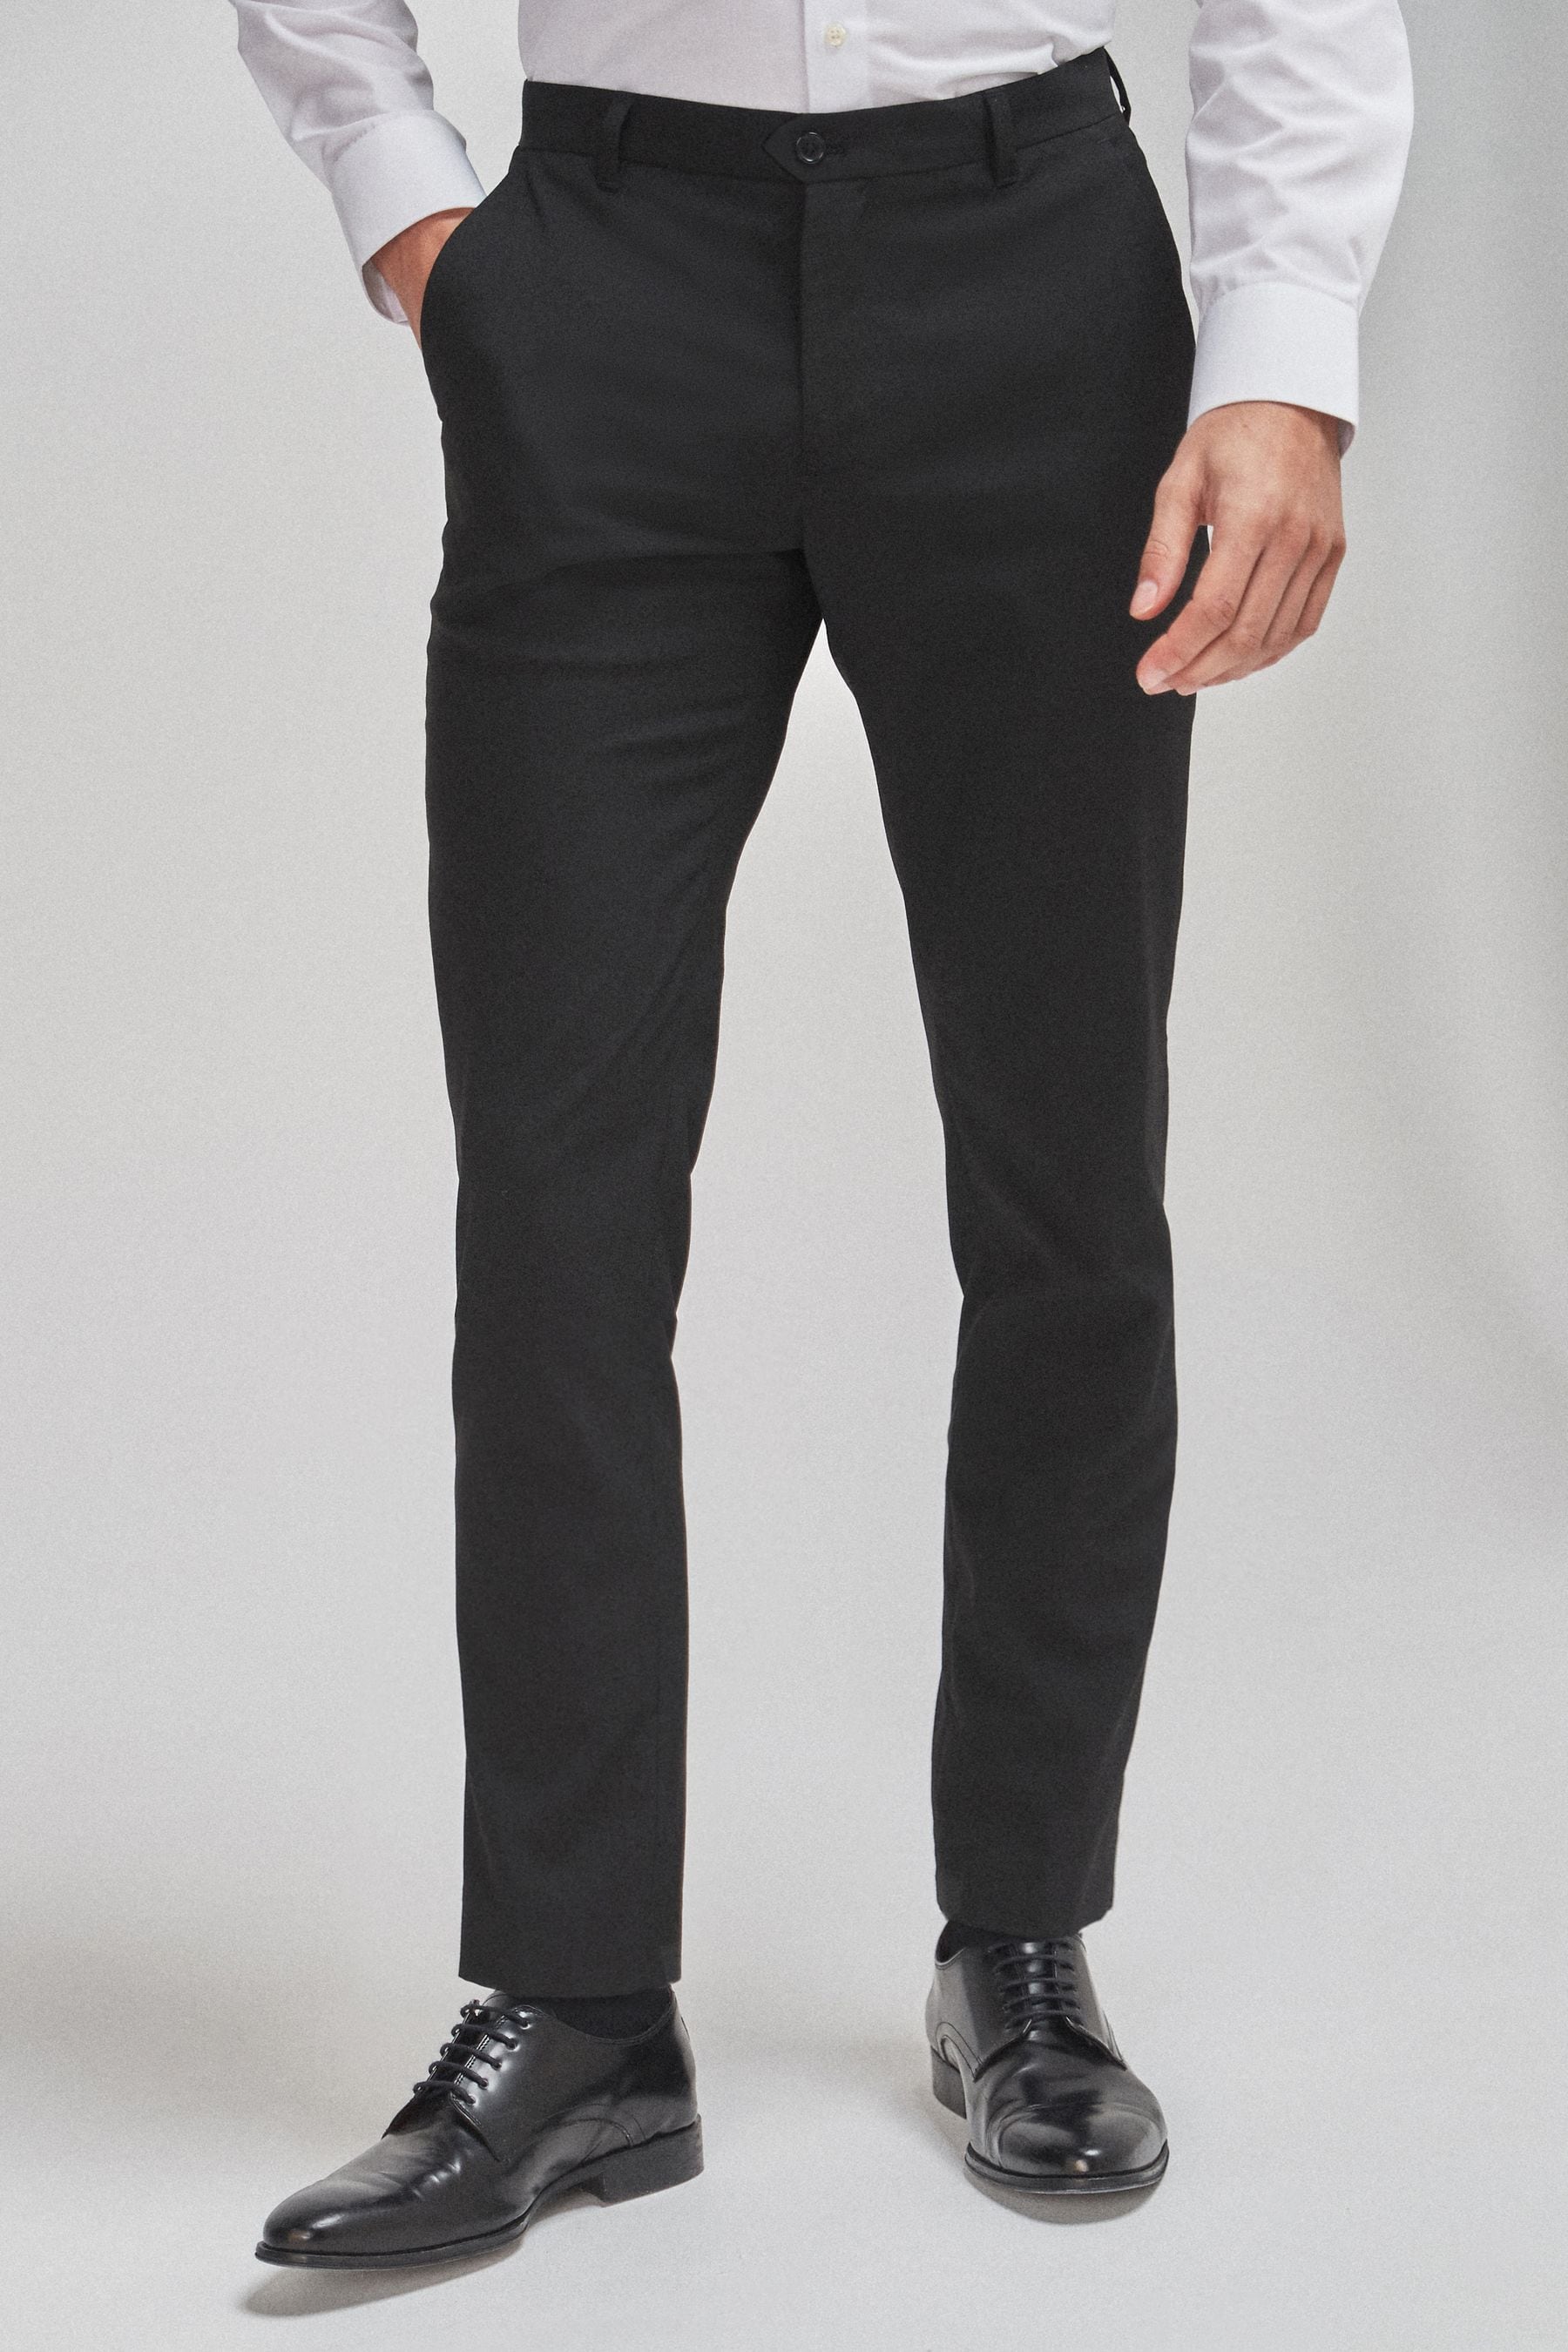 Buy Black Slim Tapered Stretch Smart Trousers from the Next UK online shop